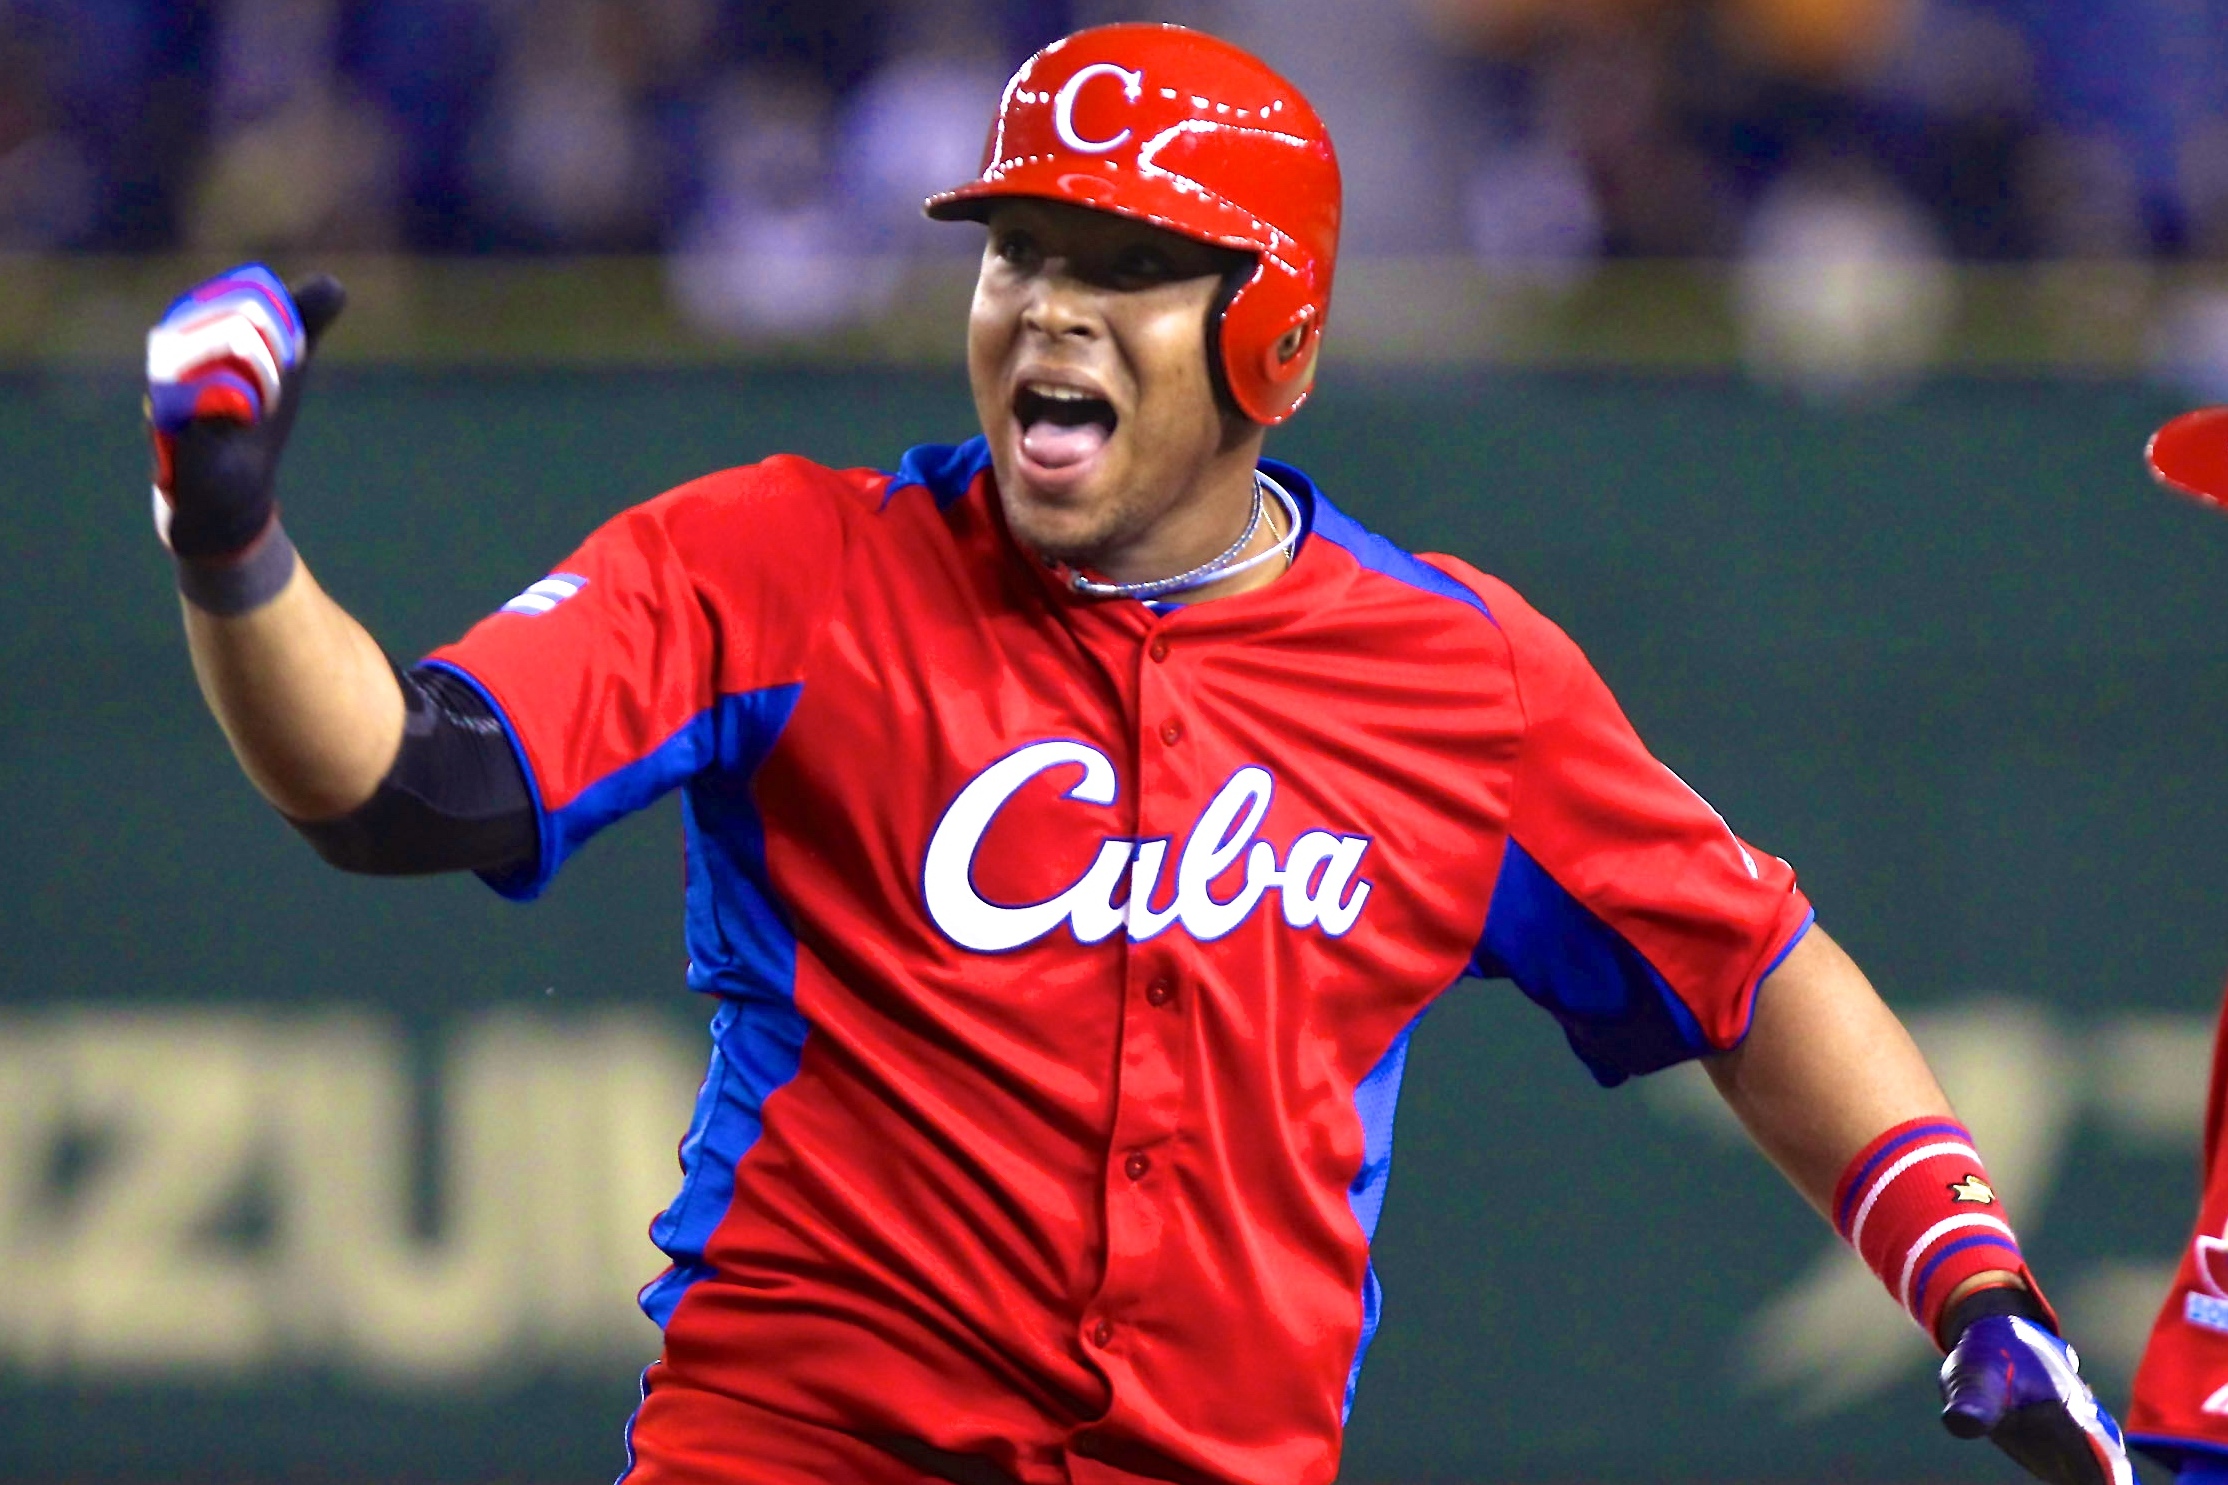 Cuban baseball player calls out extortion during the World